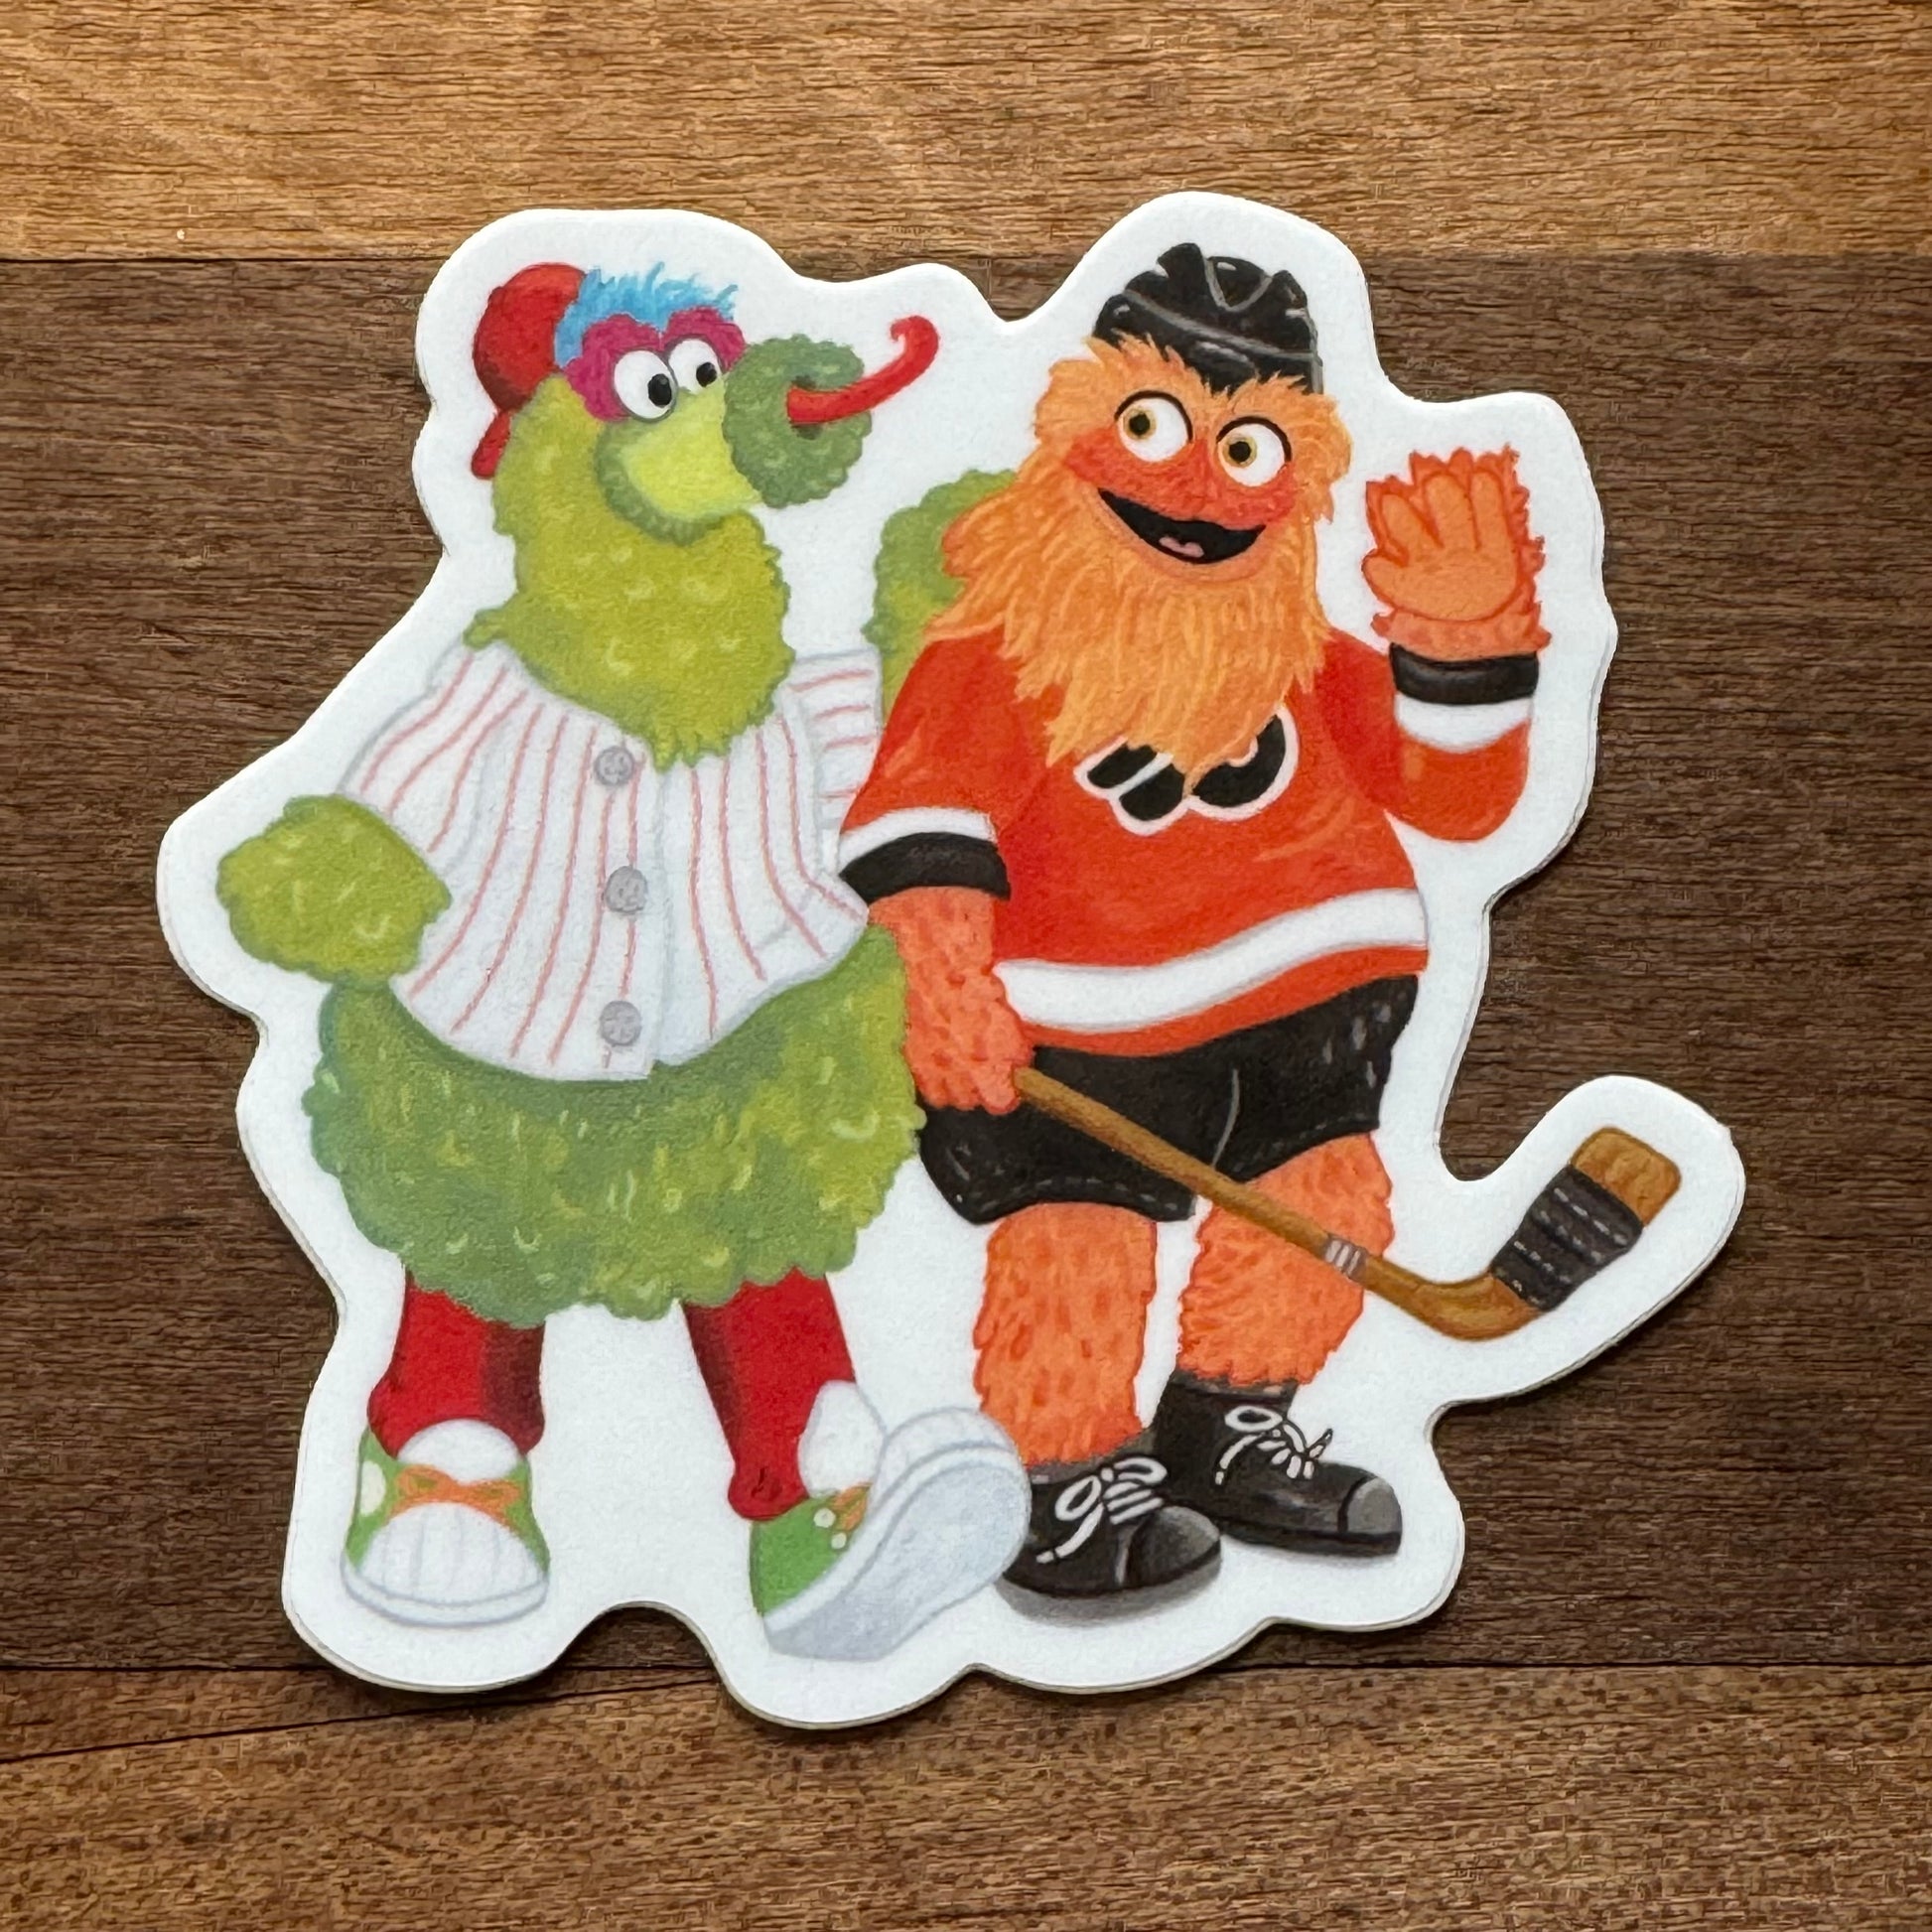 Illustration of two whimsical characters: one dressed as a baseball player and the other as a hockey player, designed as a Gritty & Phanatic BFF sticker by Jamie Bendas.